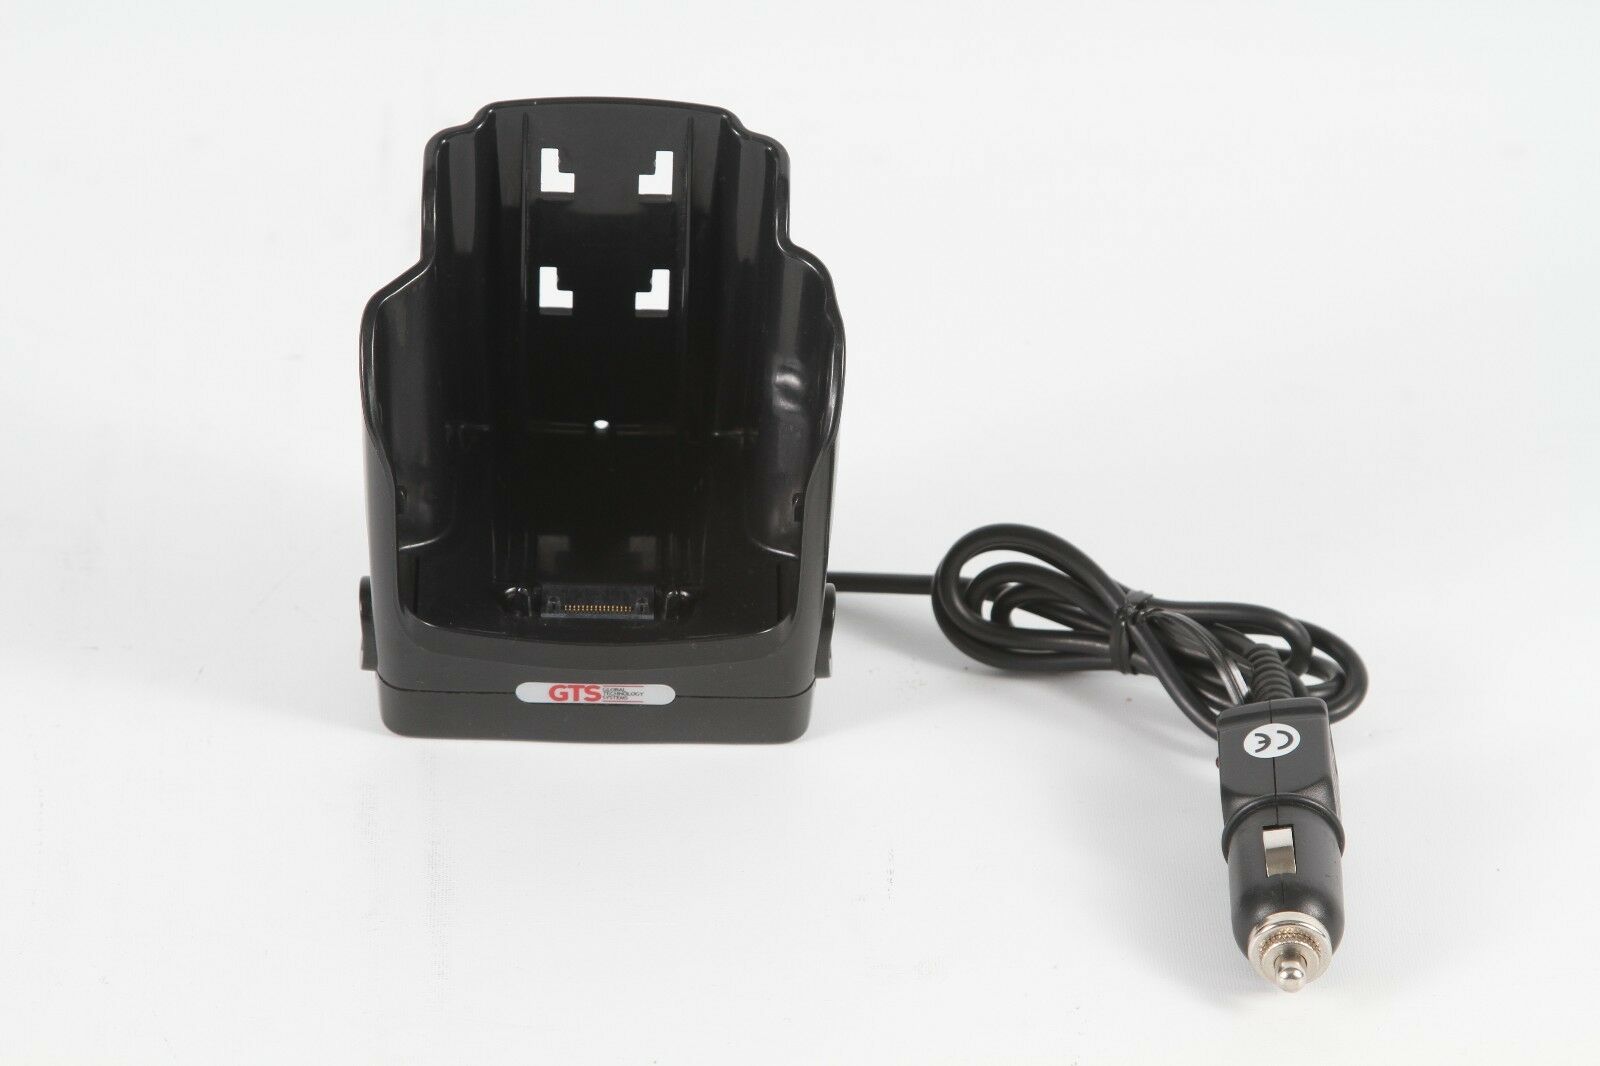 GTS HCH-7010VL Vehicle Charger for use with Motorola MC70/MC75 DC Input